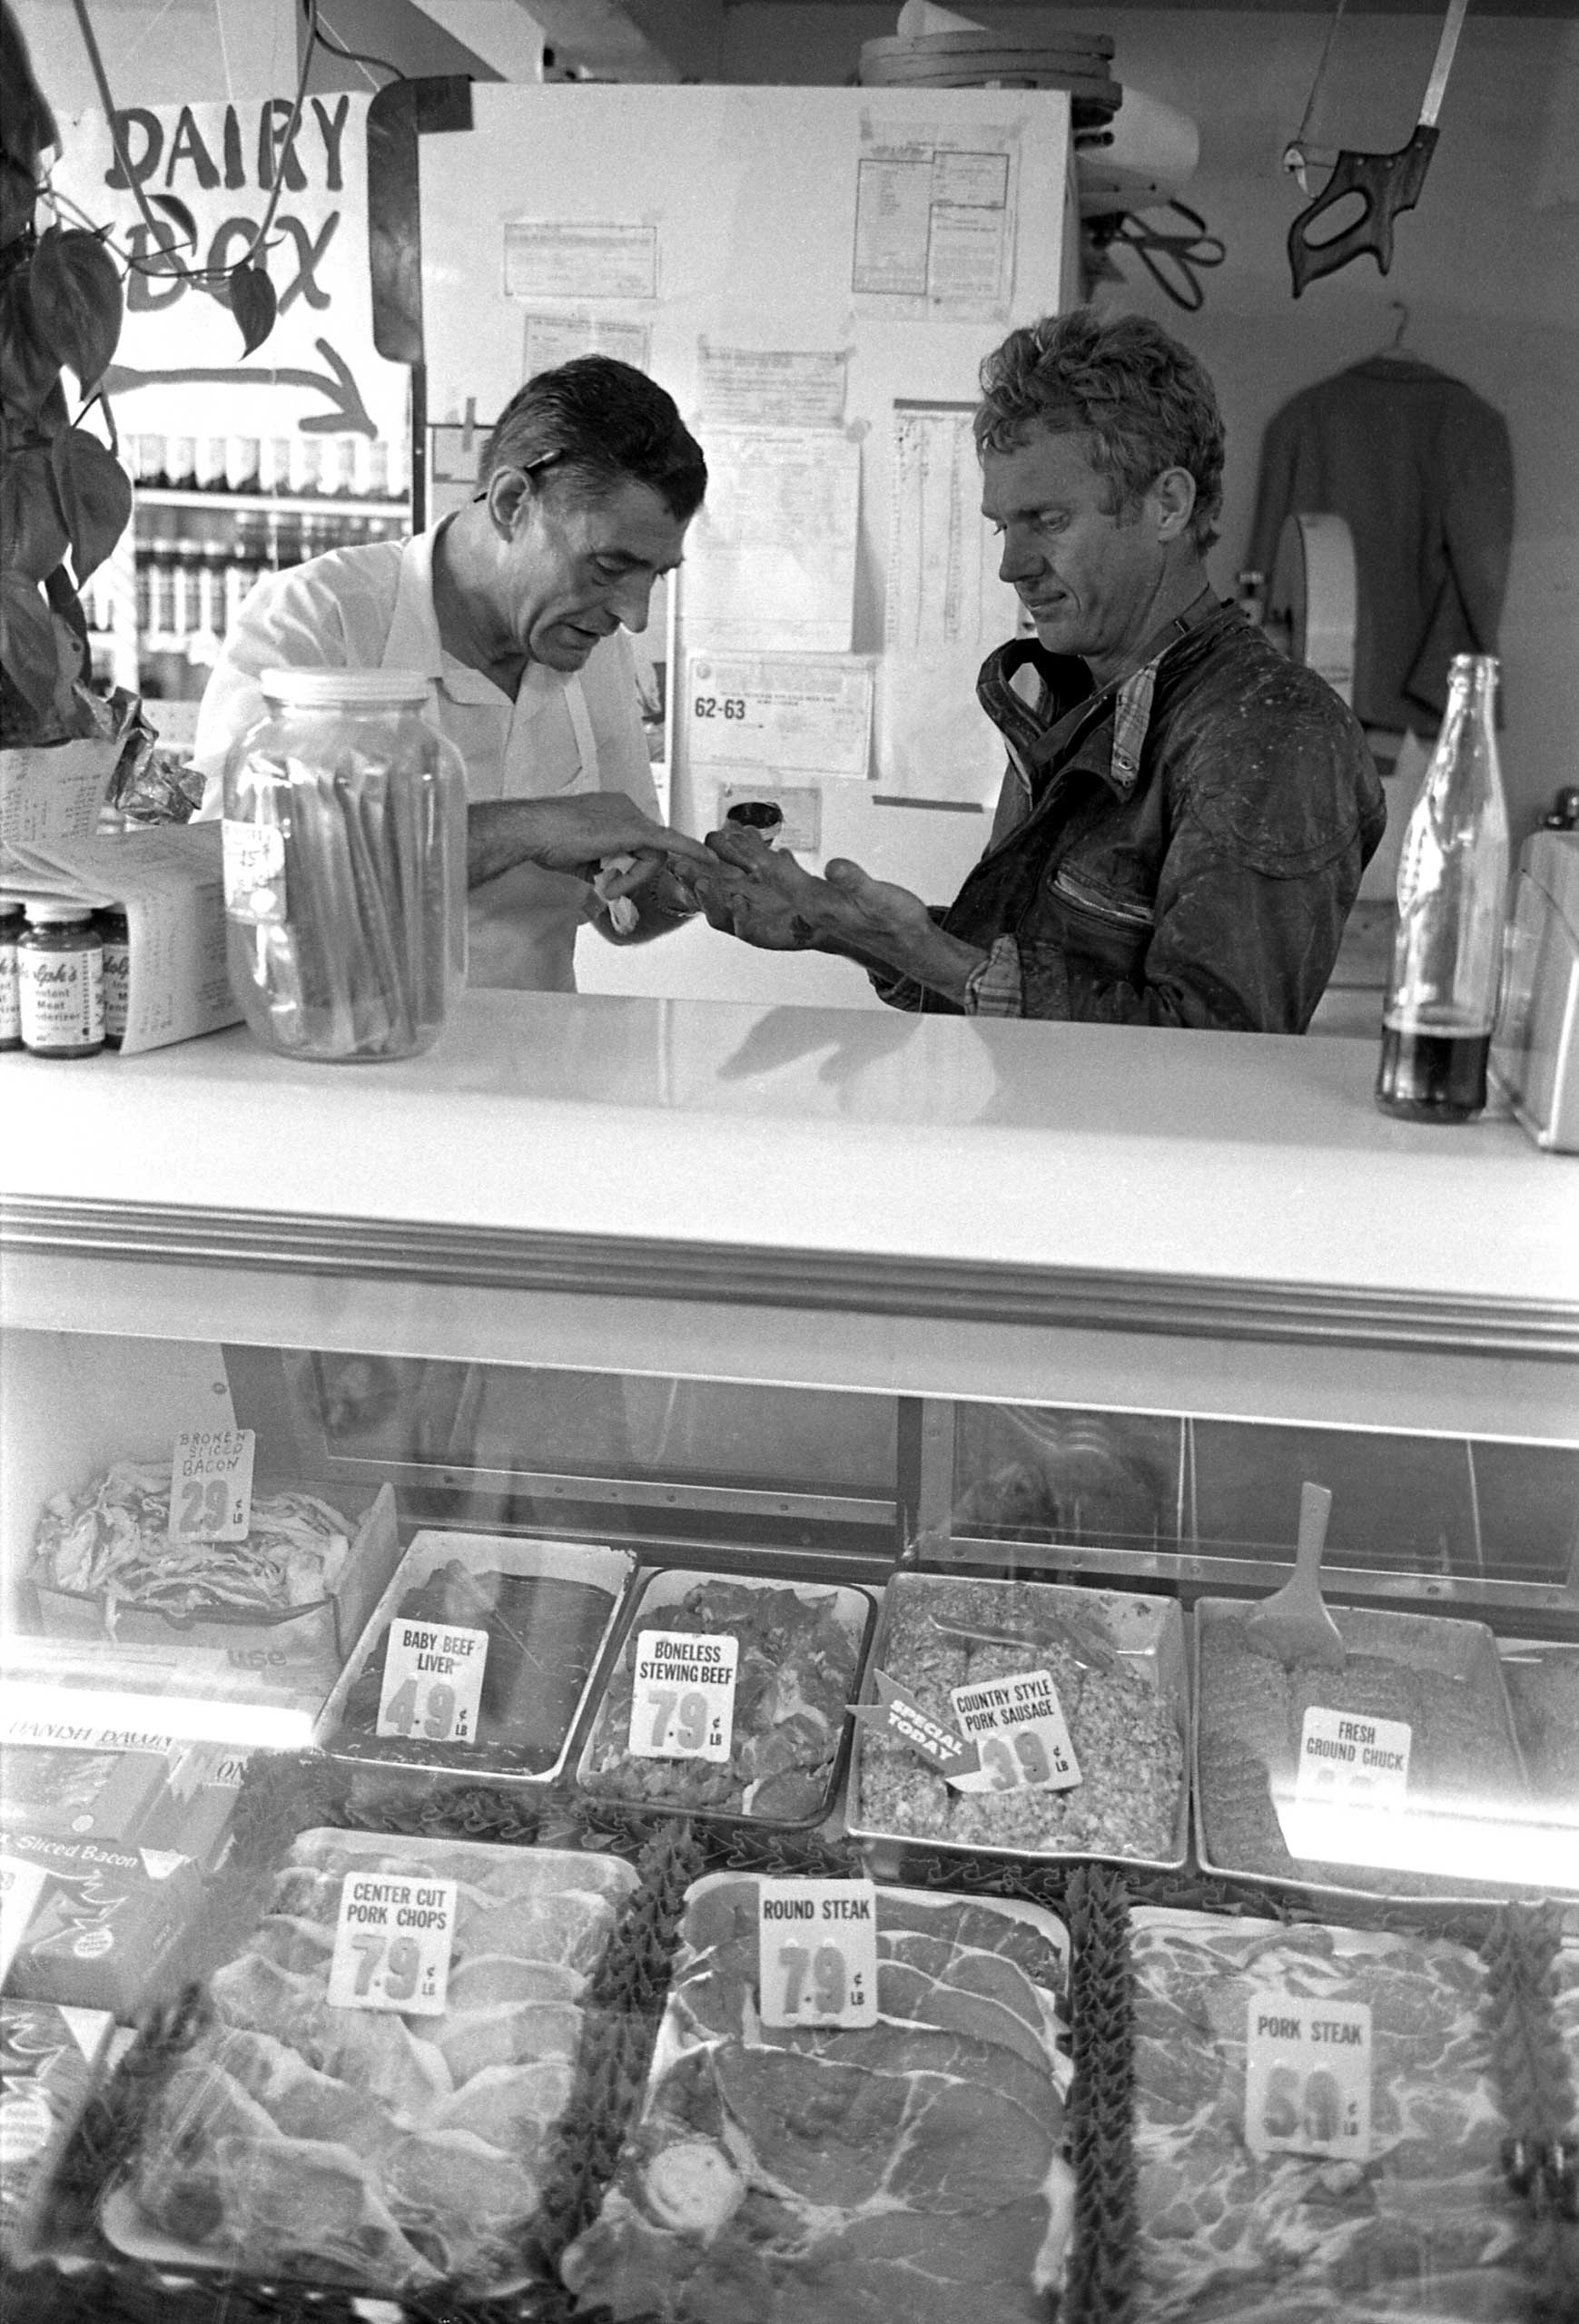 Steve McQueen makes a stop at a grocery store in Pearblossom, Calif., to get some treatment for race-bloodied hands, 1963.